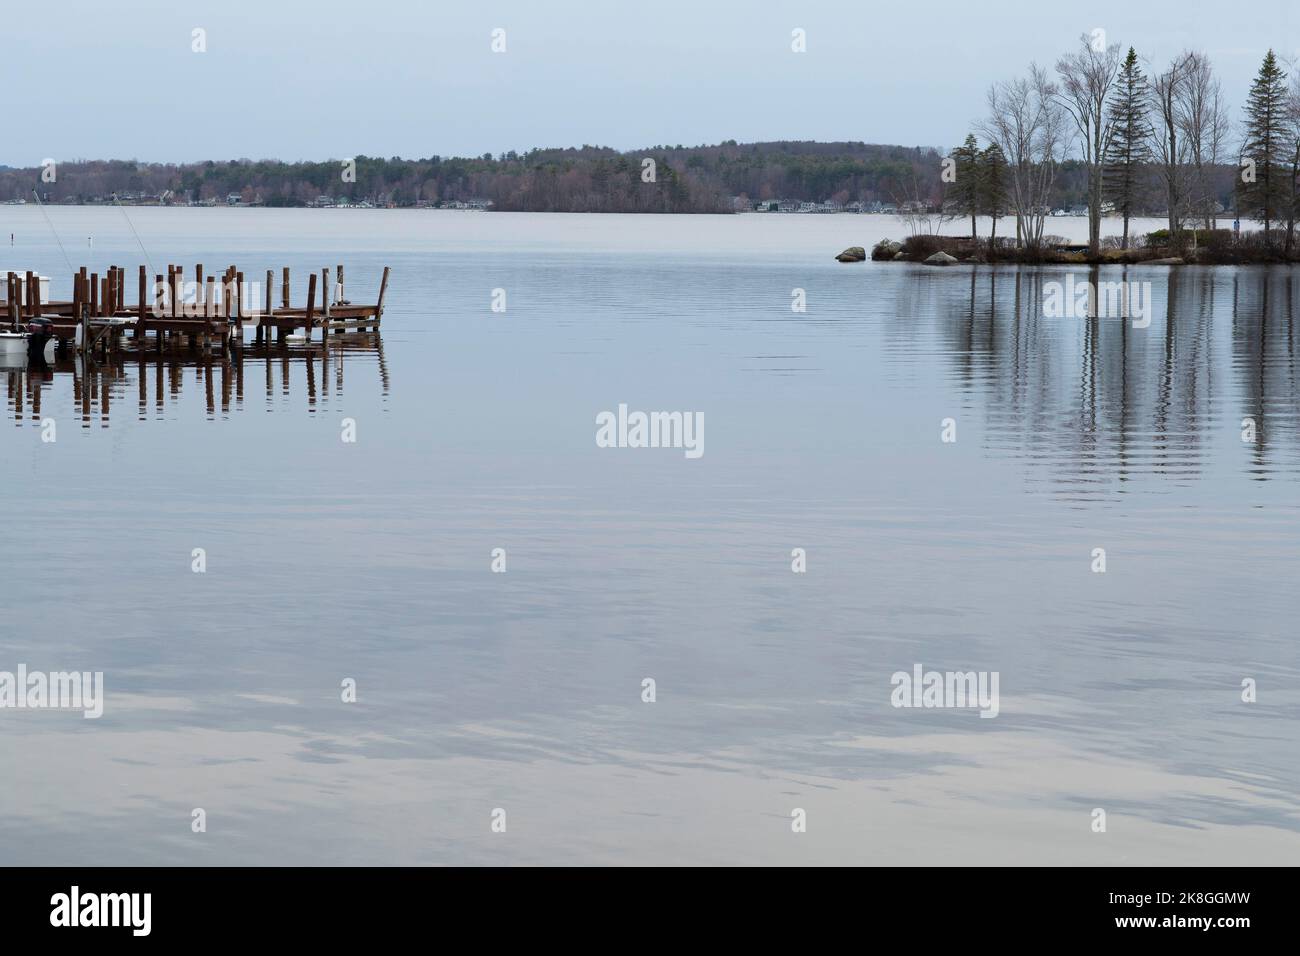 Paugus Bay, is named after Chief Paugus who fought in the Dummer's War. Includes 1,227 acres of waterbody in City of Laconia at Weirs Beach, a family Stock Photo